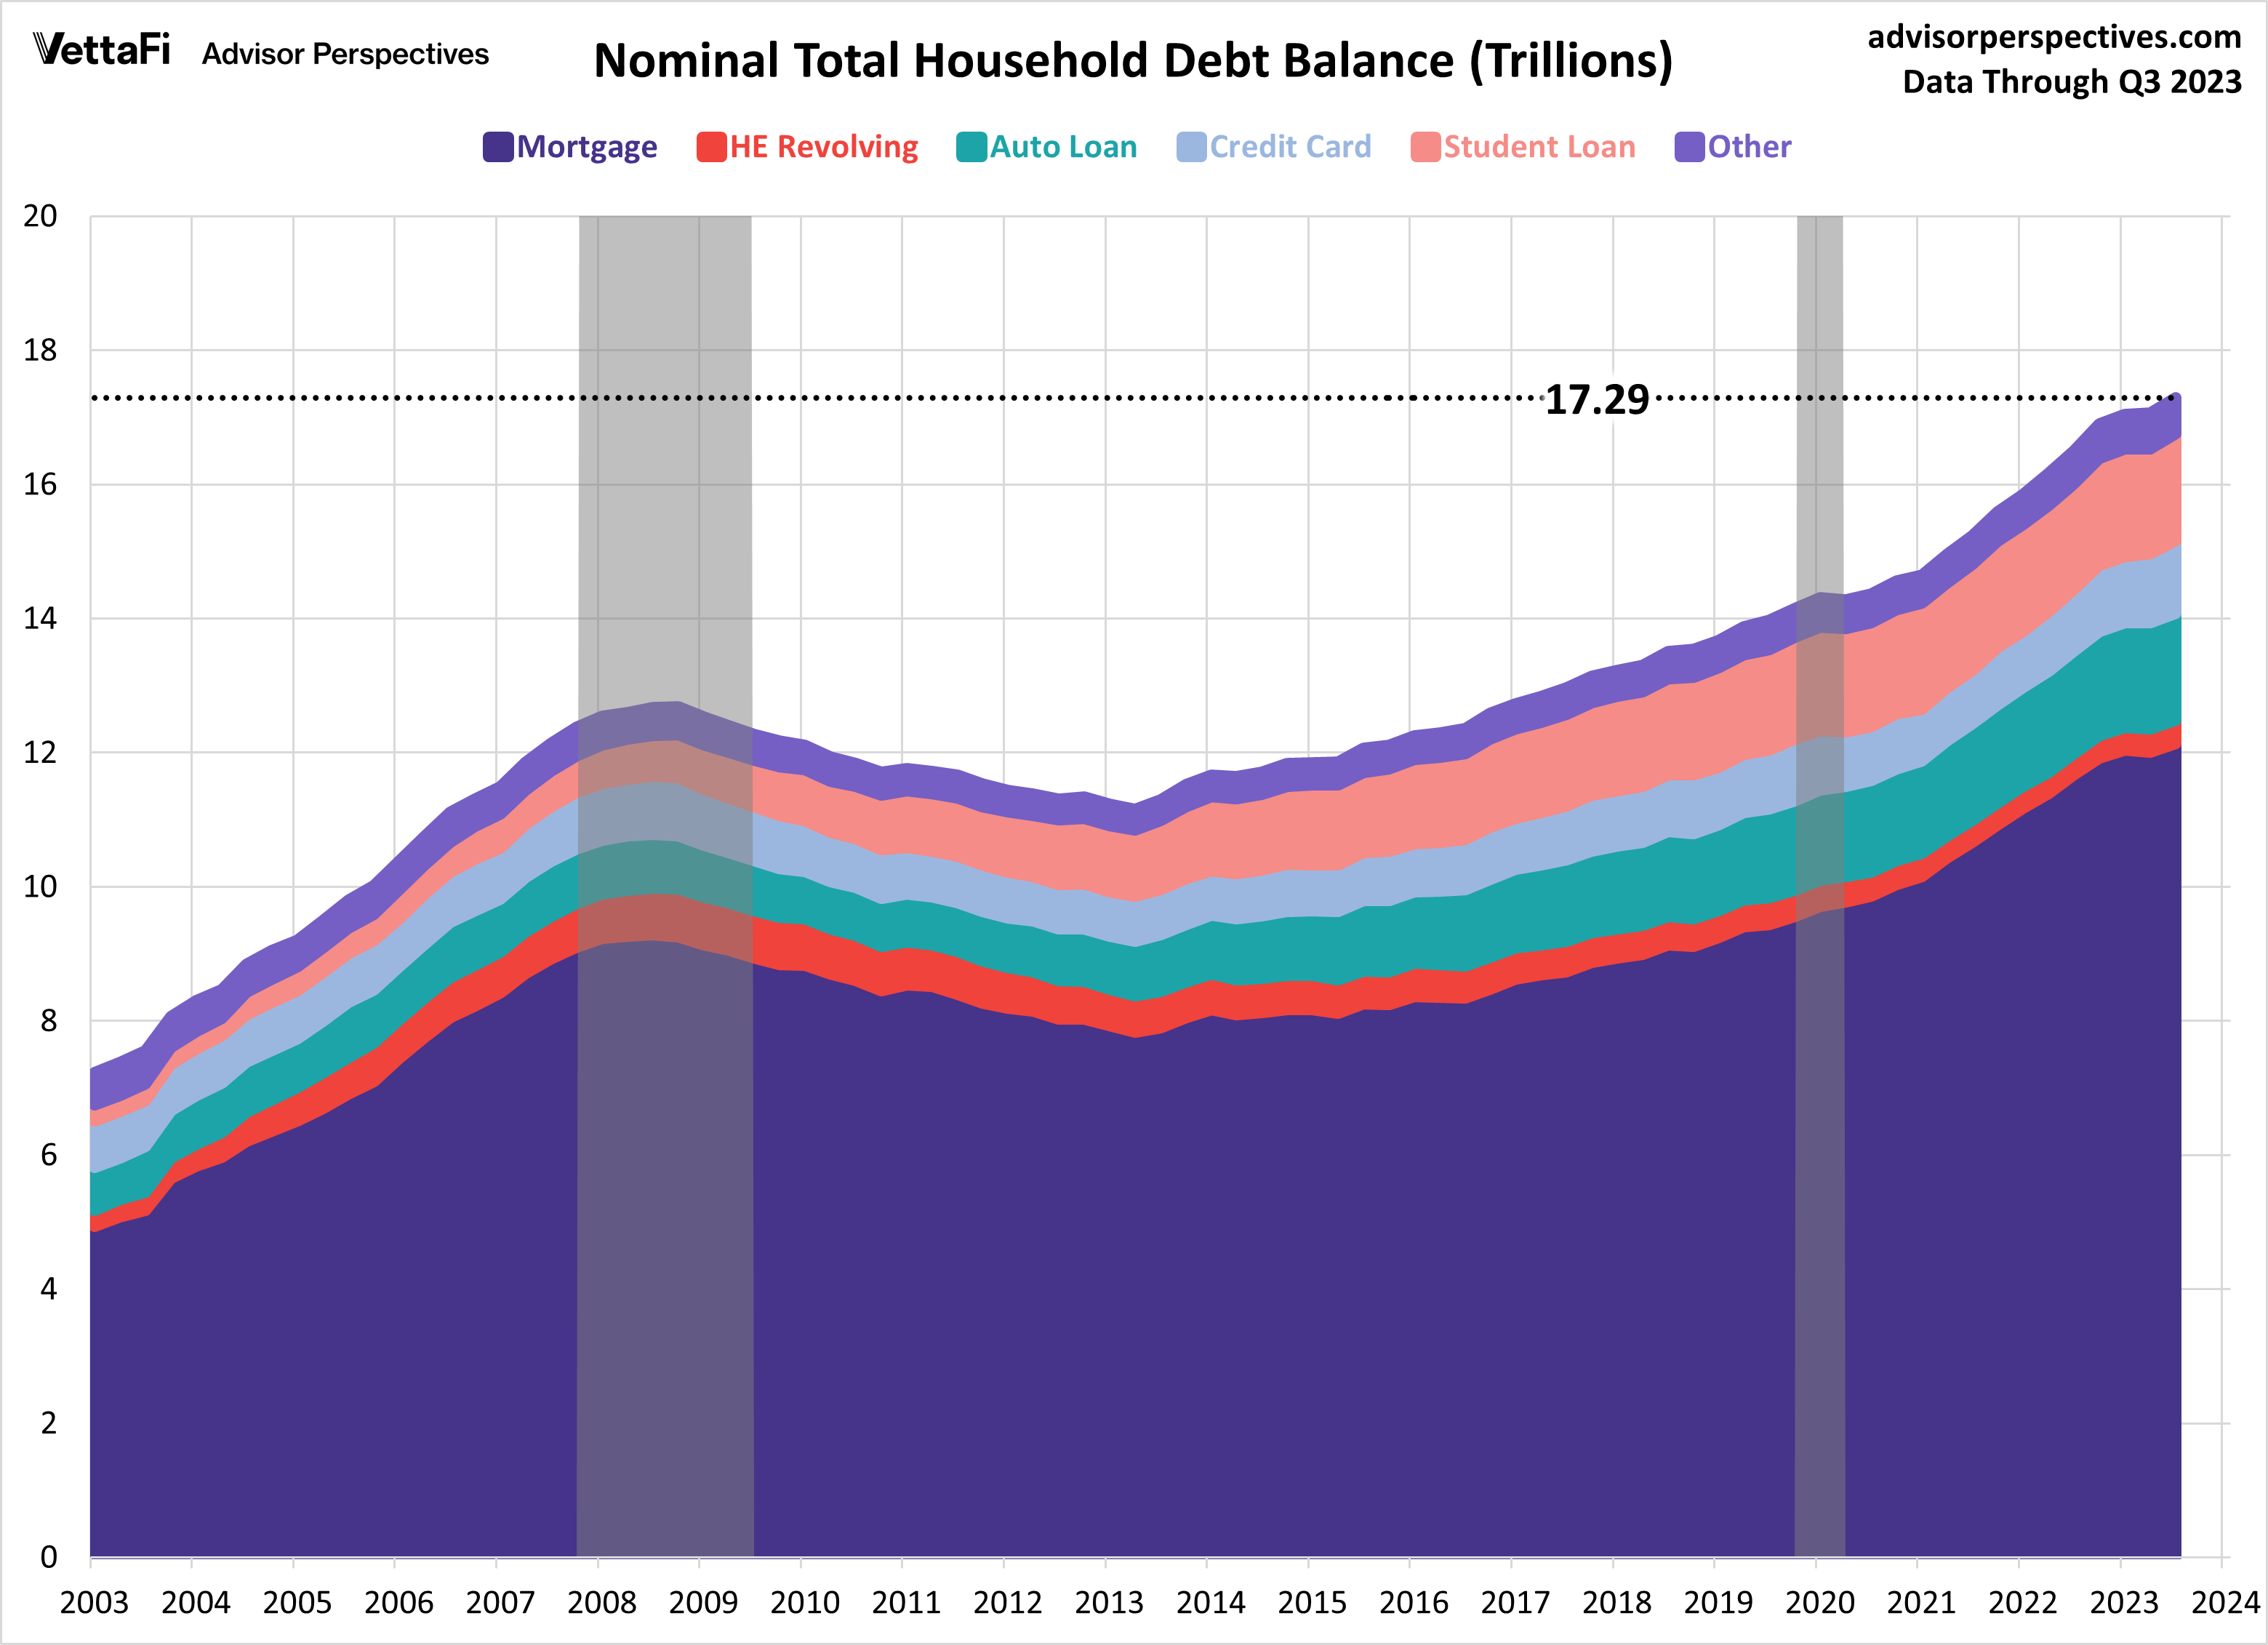 Nominal Total Household Debt Balance in Trilllions